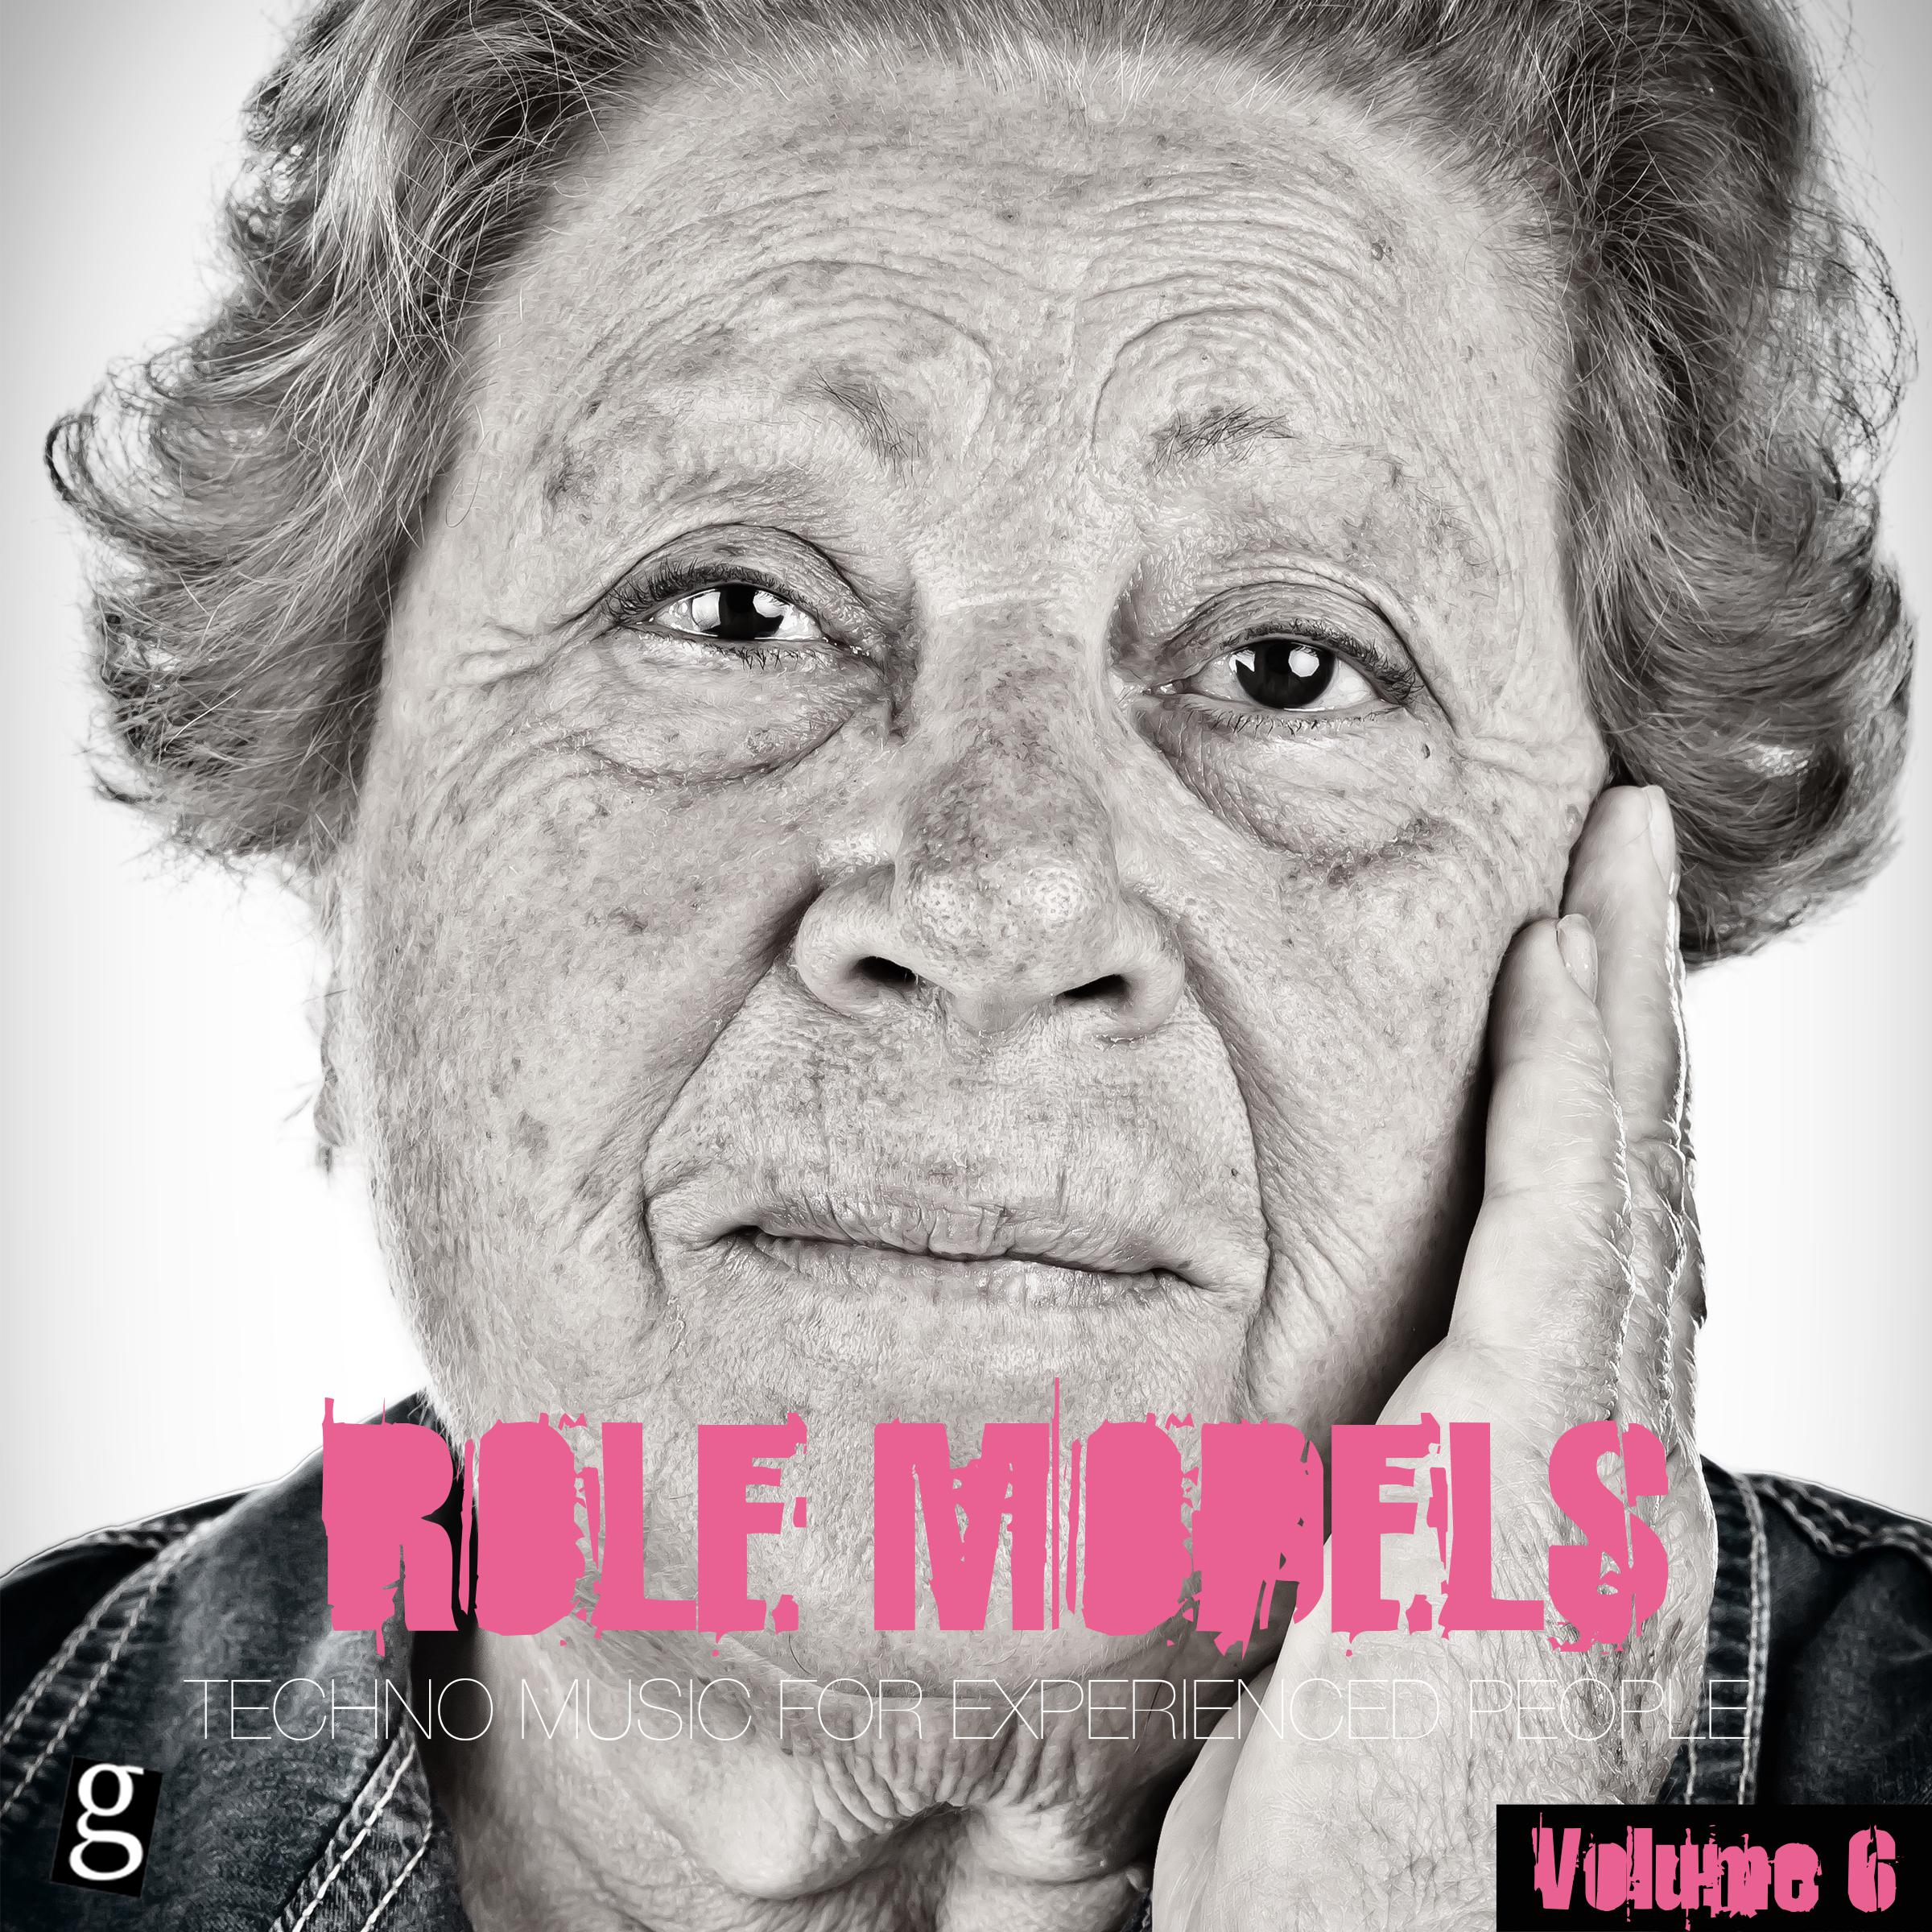 Role Models, Vol. 6 - Techno Music for Experienced People